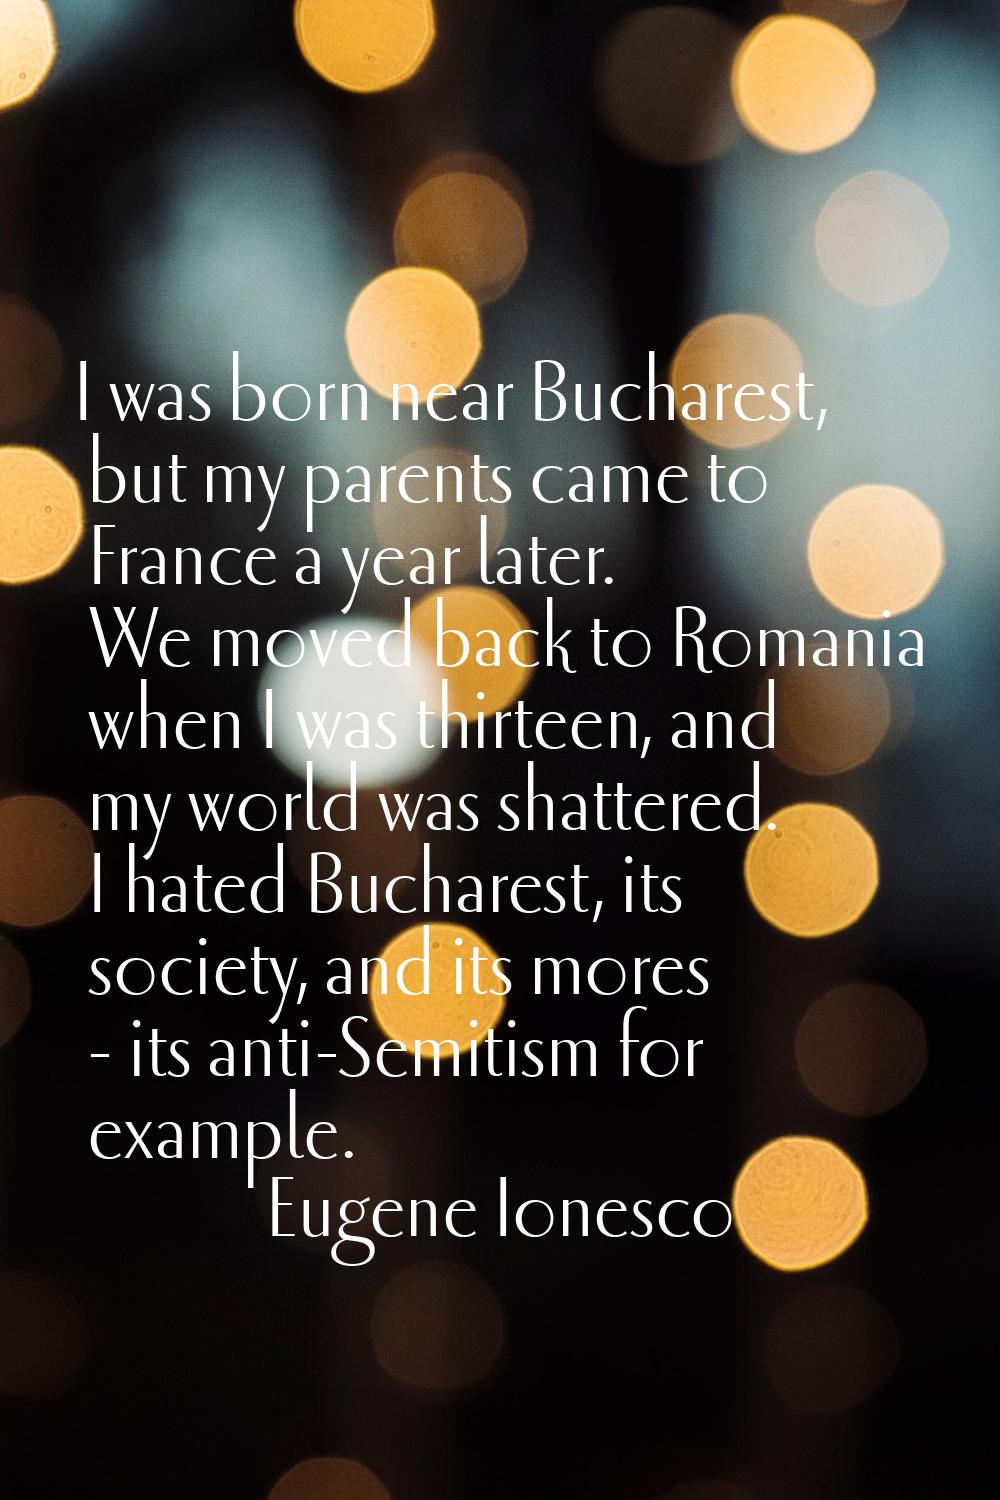 I was born near Bucharest, but my parents came to France a year later. We moved back to Romania whe